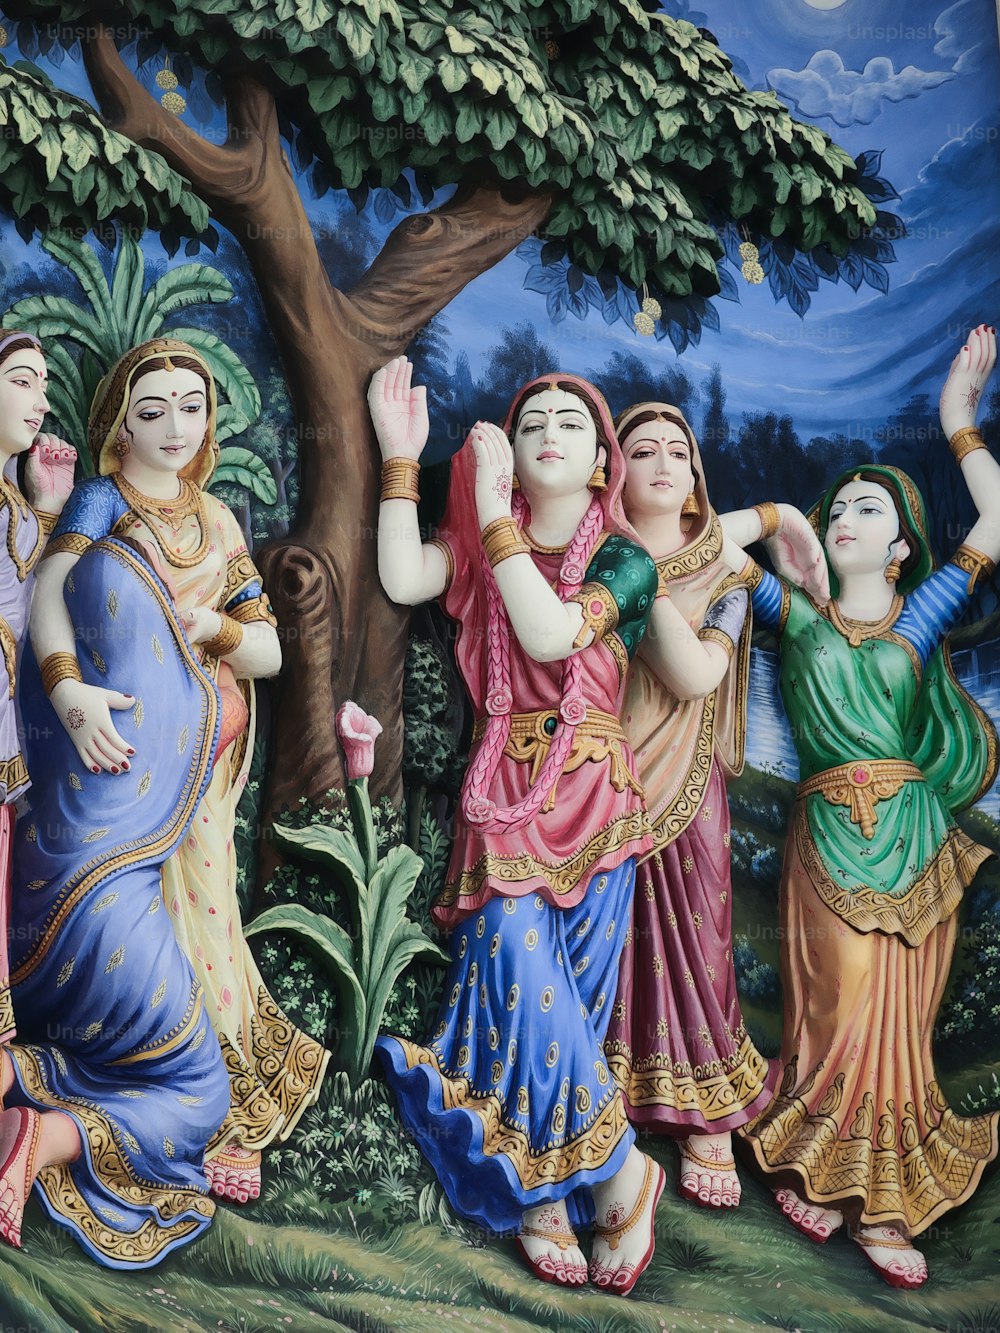 a painting of a group of women dancing in front of a tree